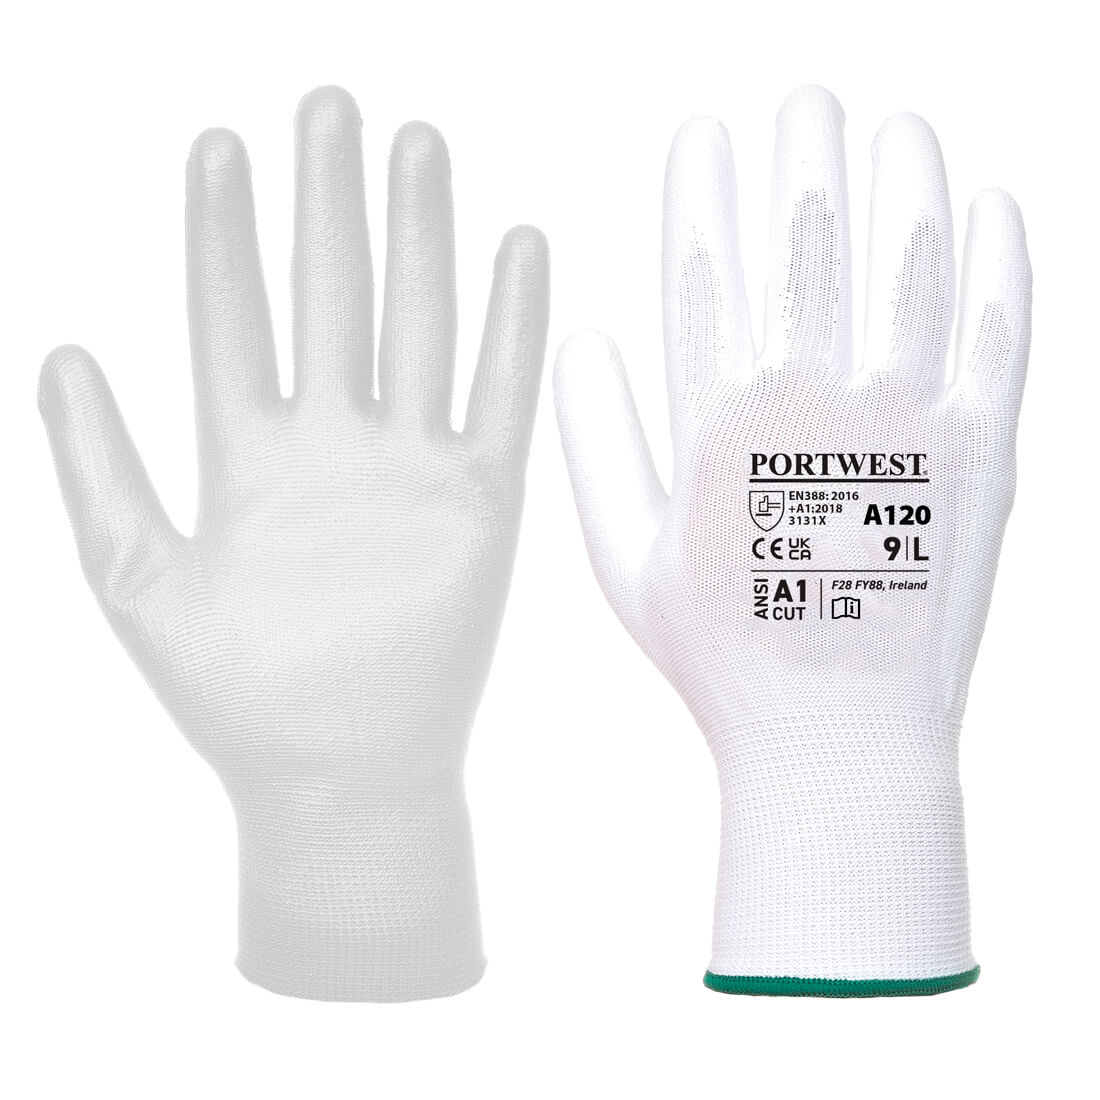 A120 Portwest® PU Coated A1 Grippy Work Gloves - White